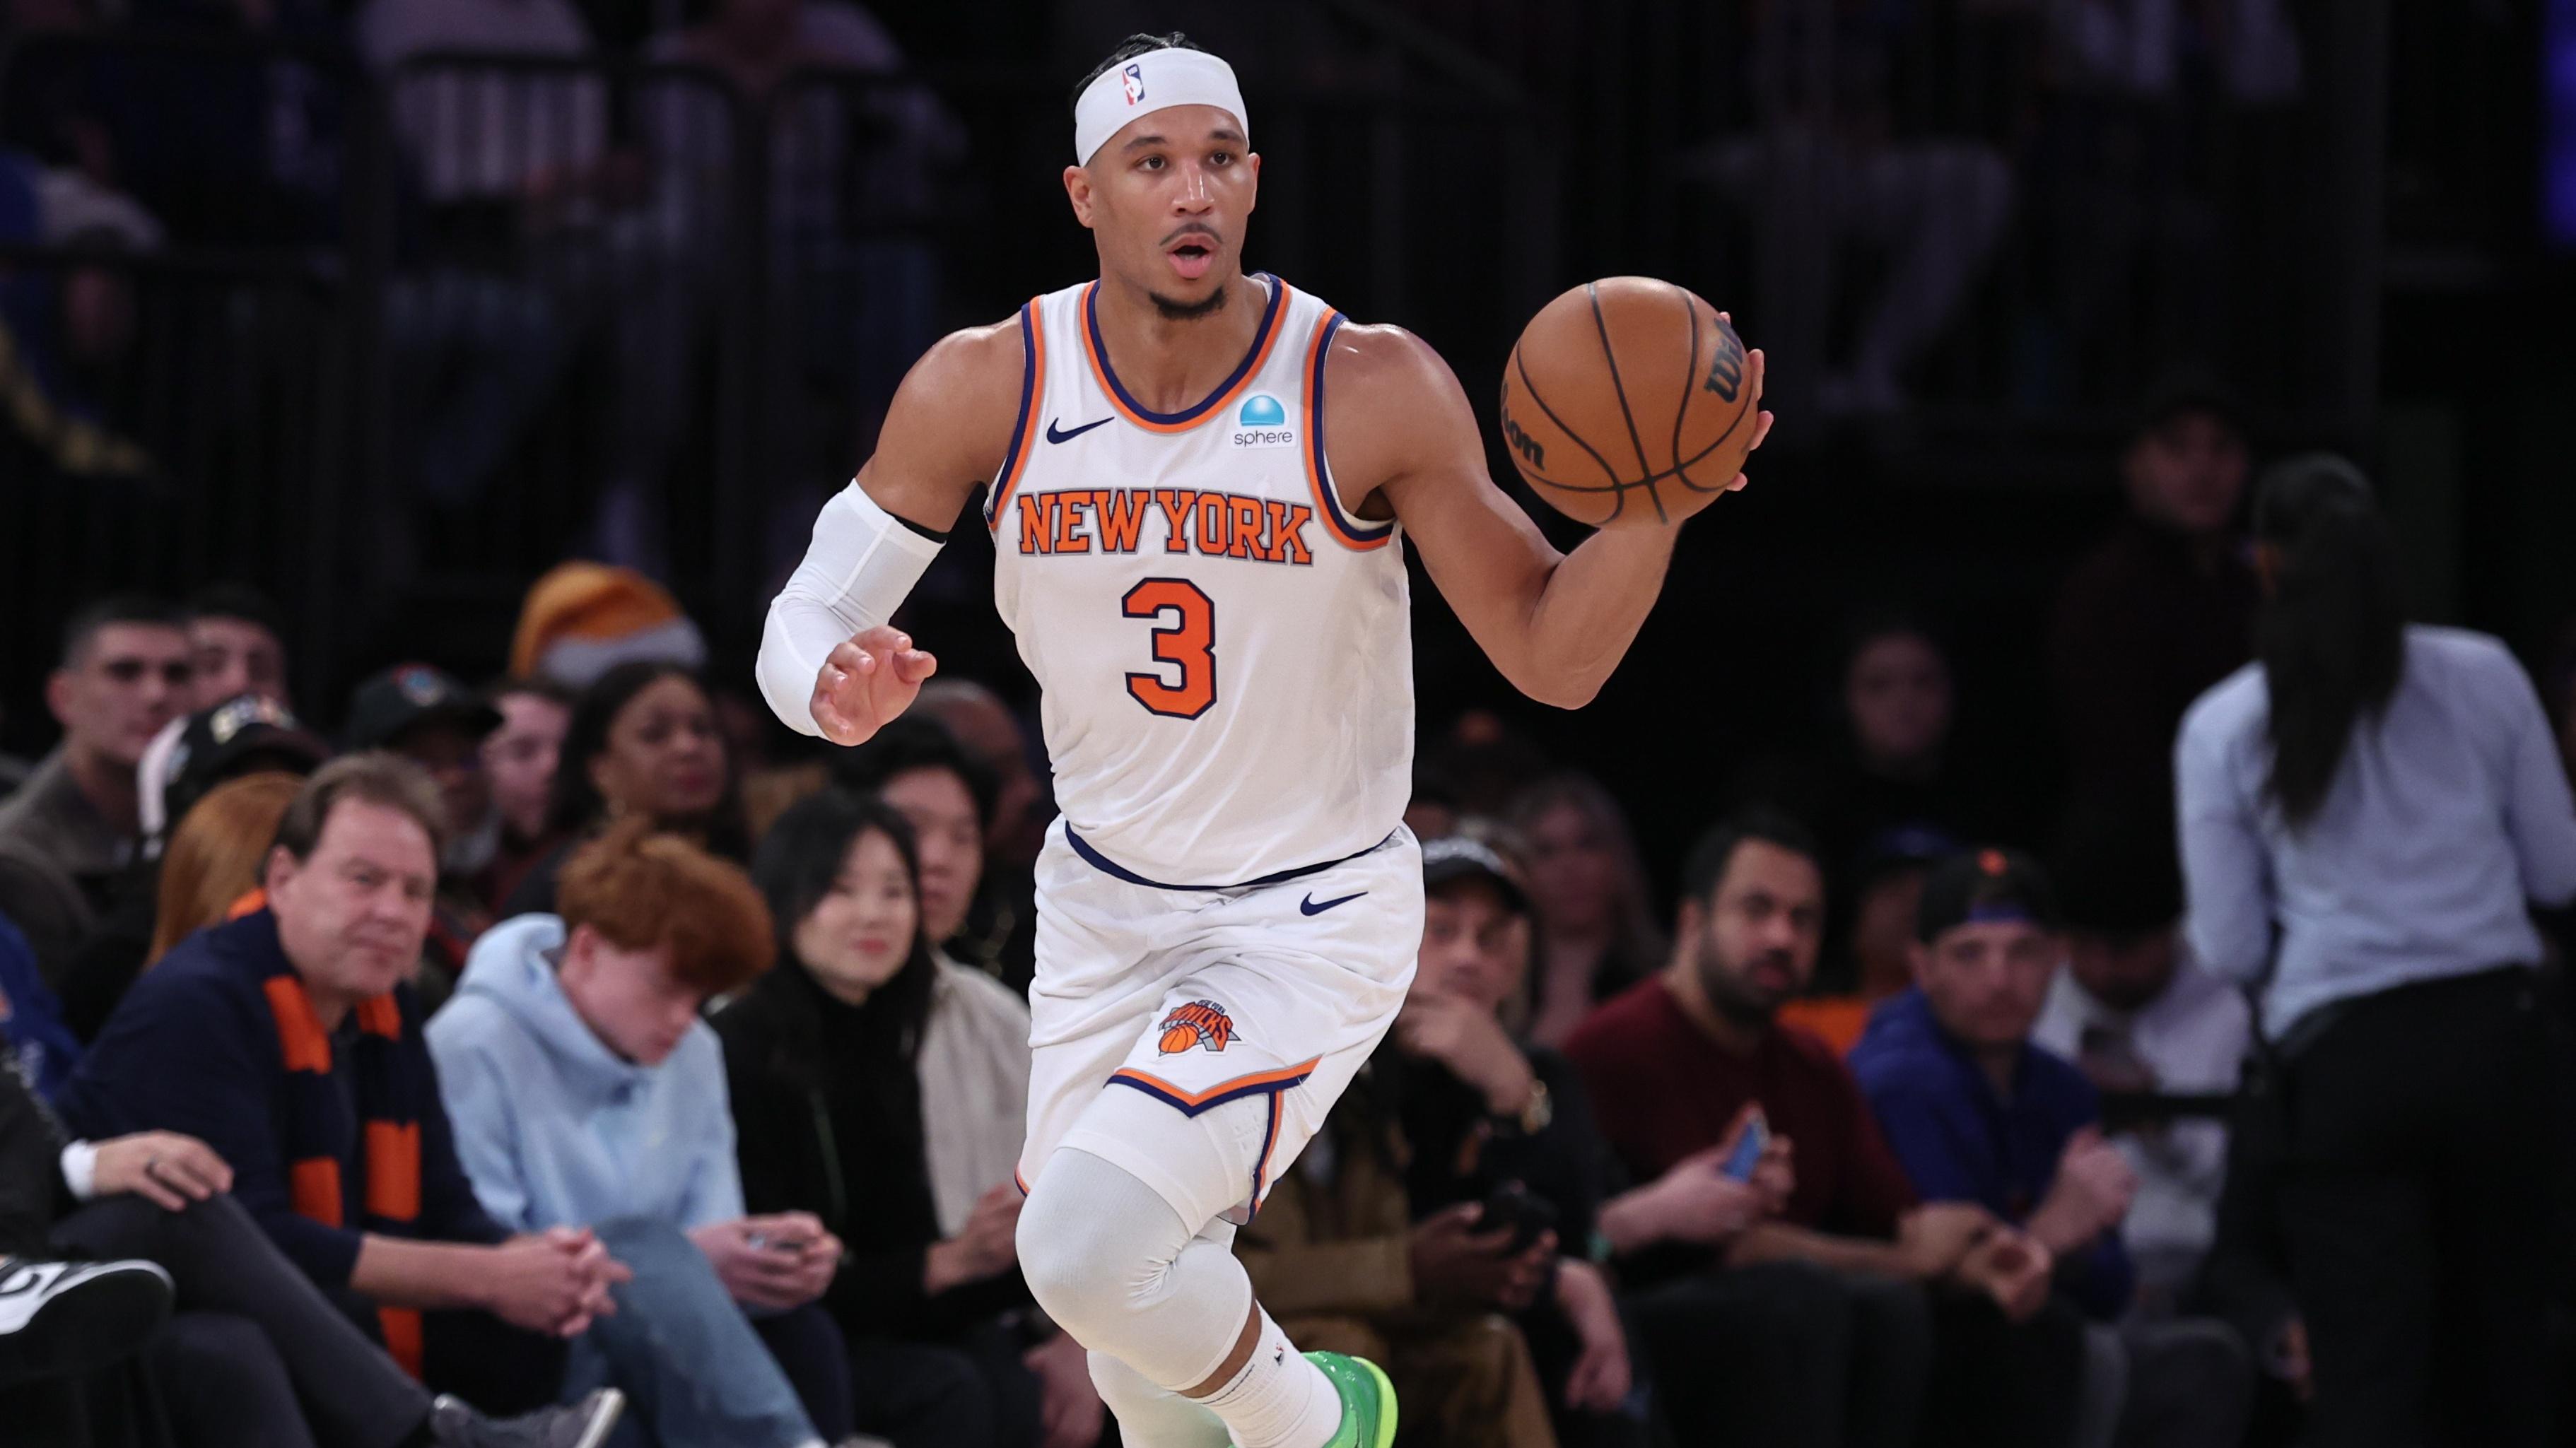 New York Knicks guard Josh Hart (3) dribbles up court during the first half against the Milwaukee Bucks at Madison Square Garden / Vincent Carchietta - USA TODAY Sports